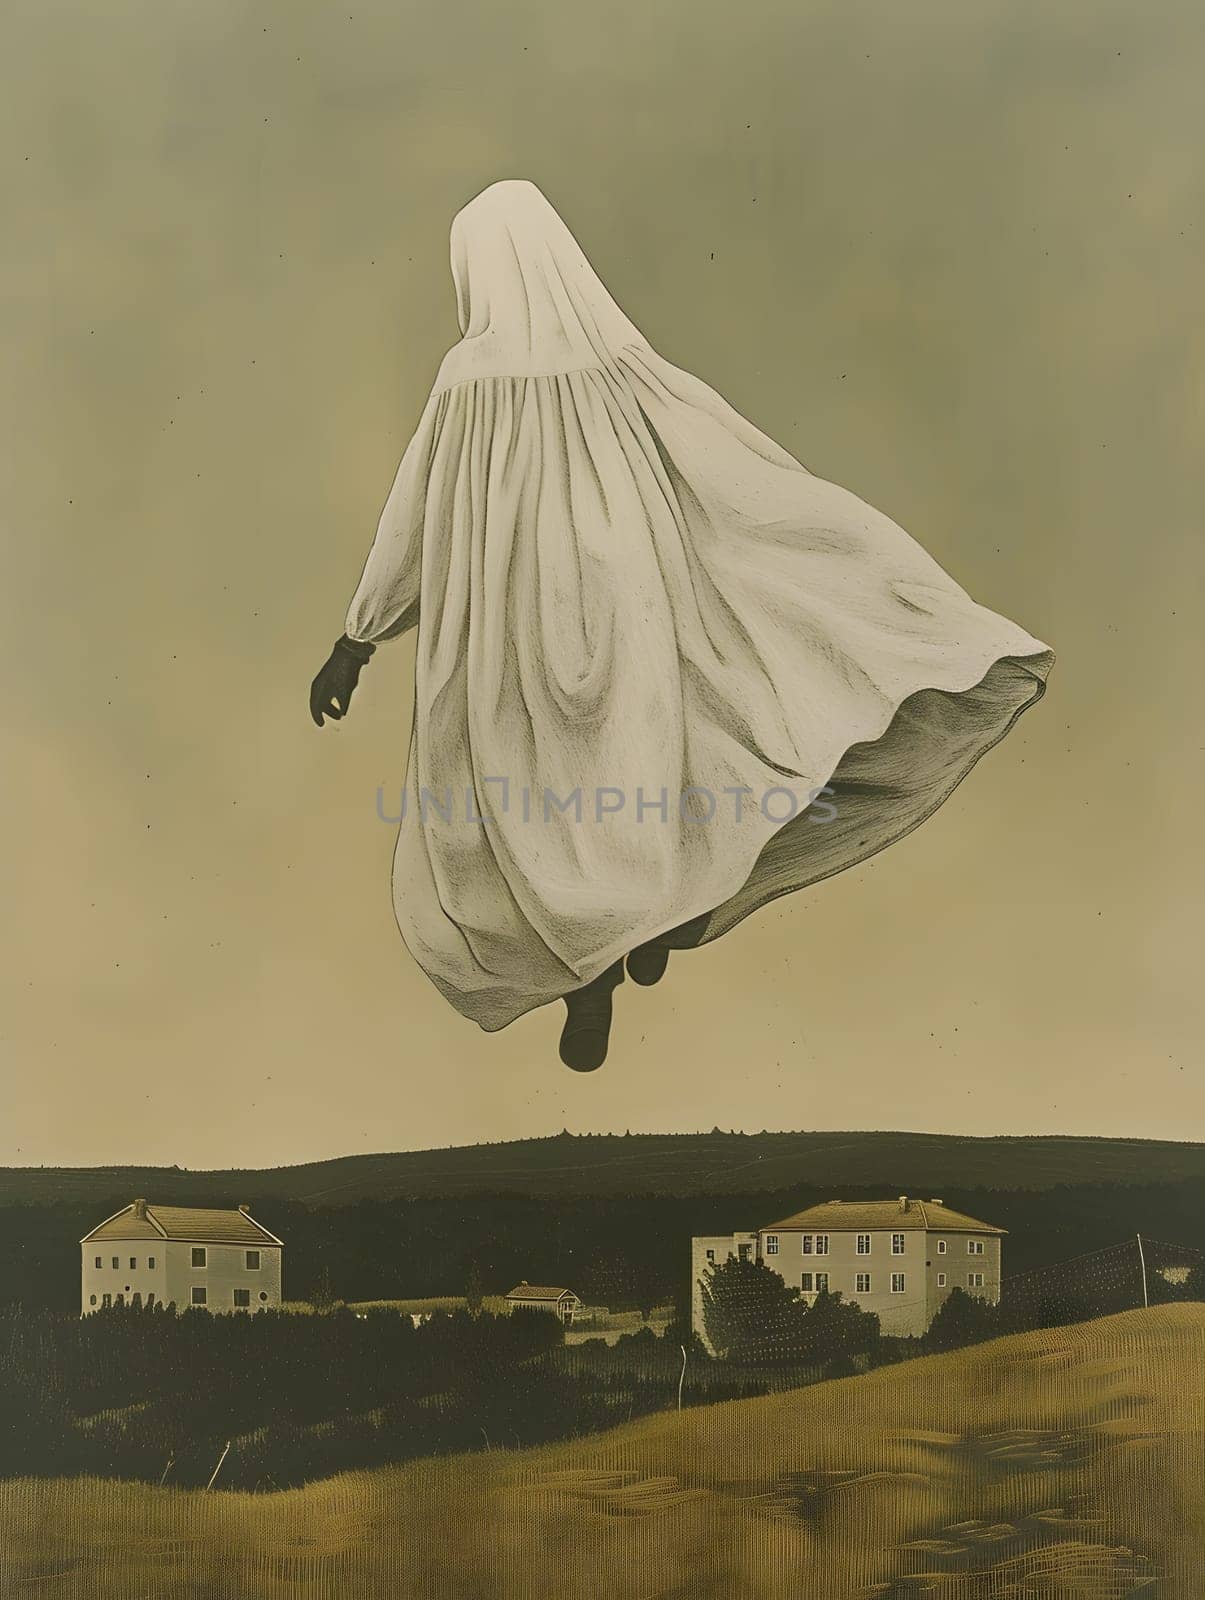 A person in a white dress soars through the sky with wings by Nadtochiy